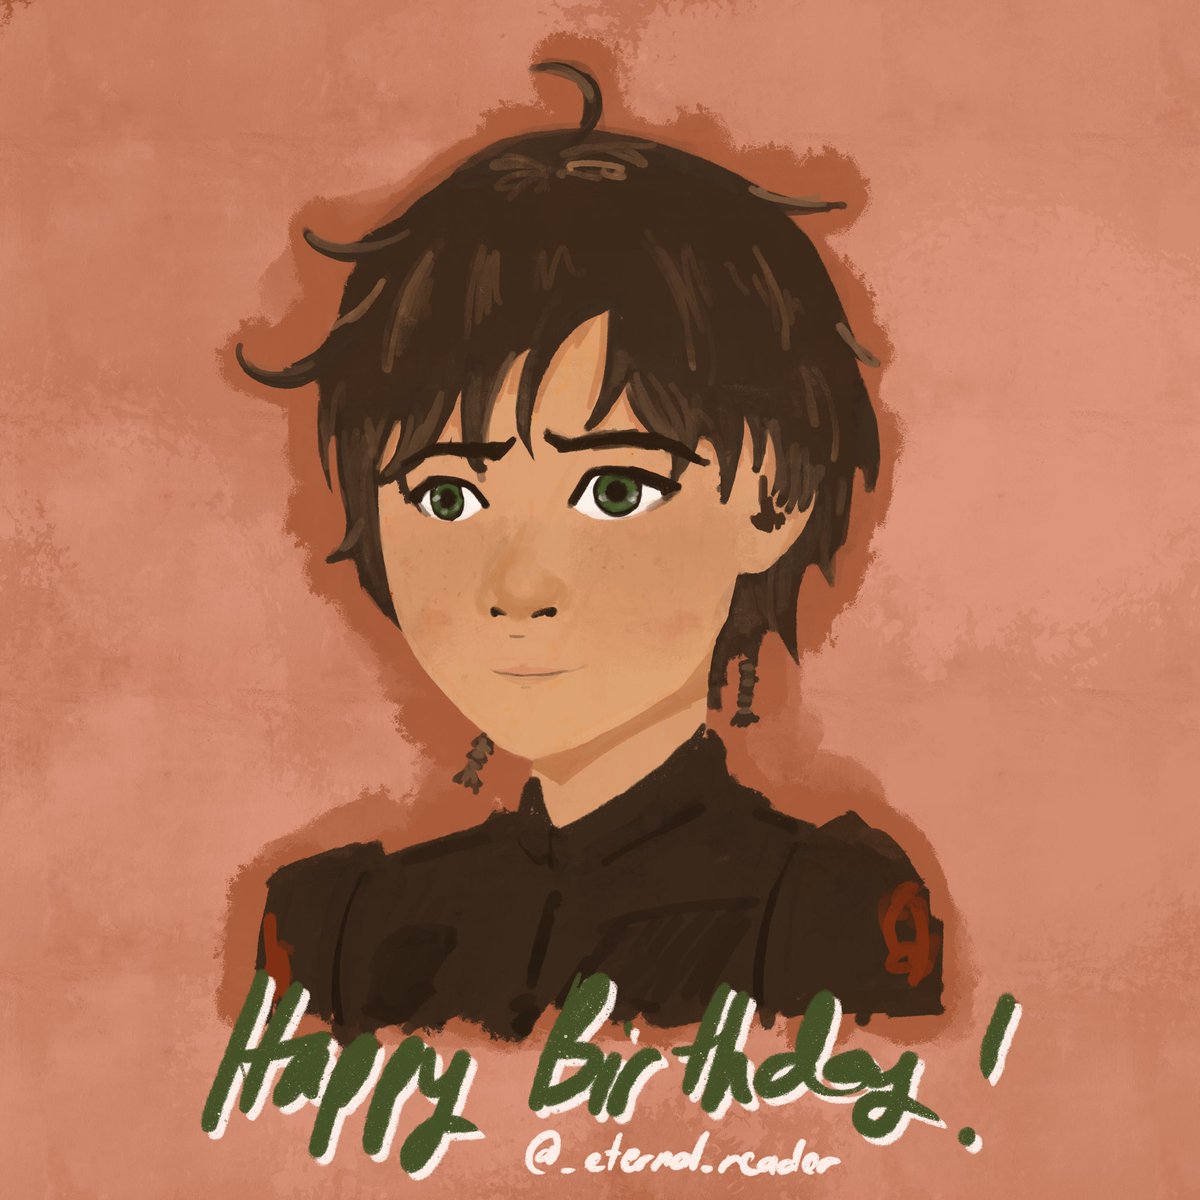 Happy Birthday Hiccup Horrendous Haddock III !! This year is not a leap year but your birthday is still here 🥹 #httyd #hiccuphaddock #rtte